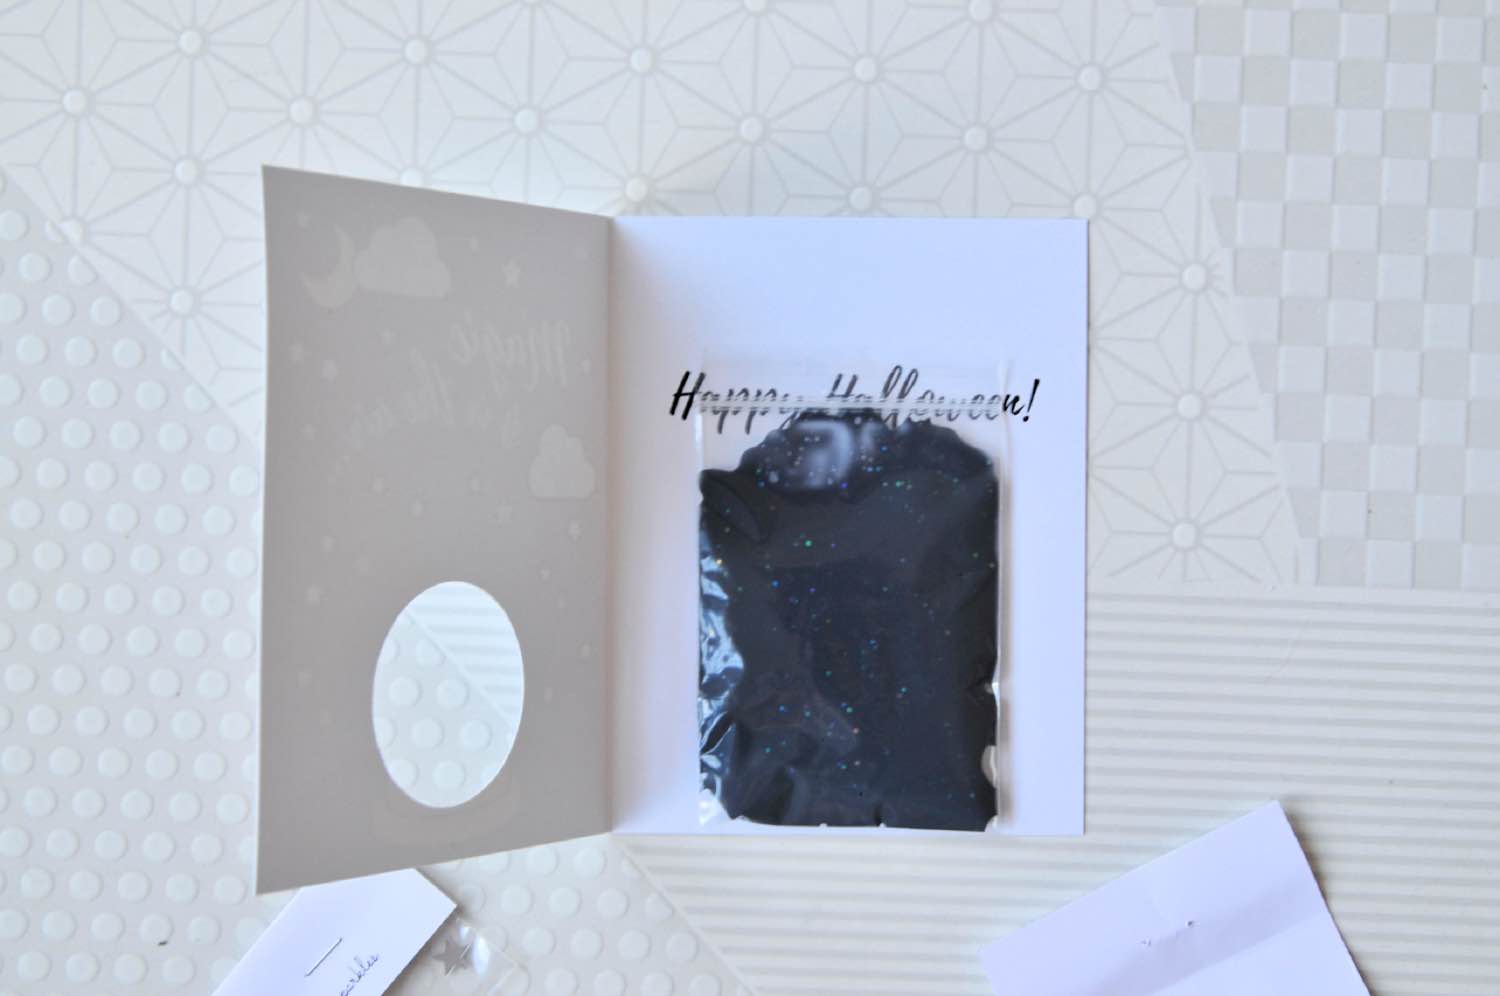 where to place the slime inside the diy halloween card